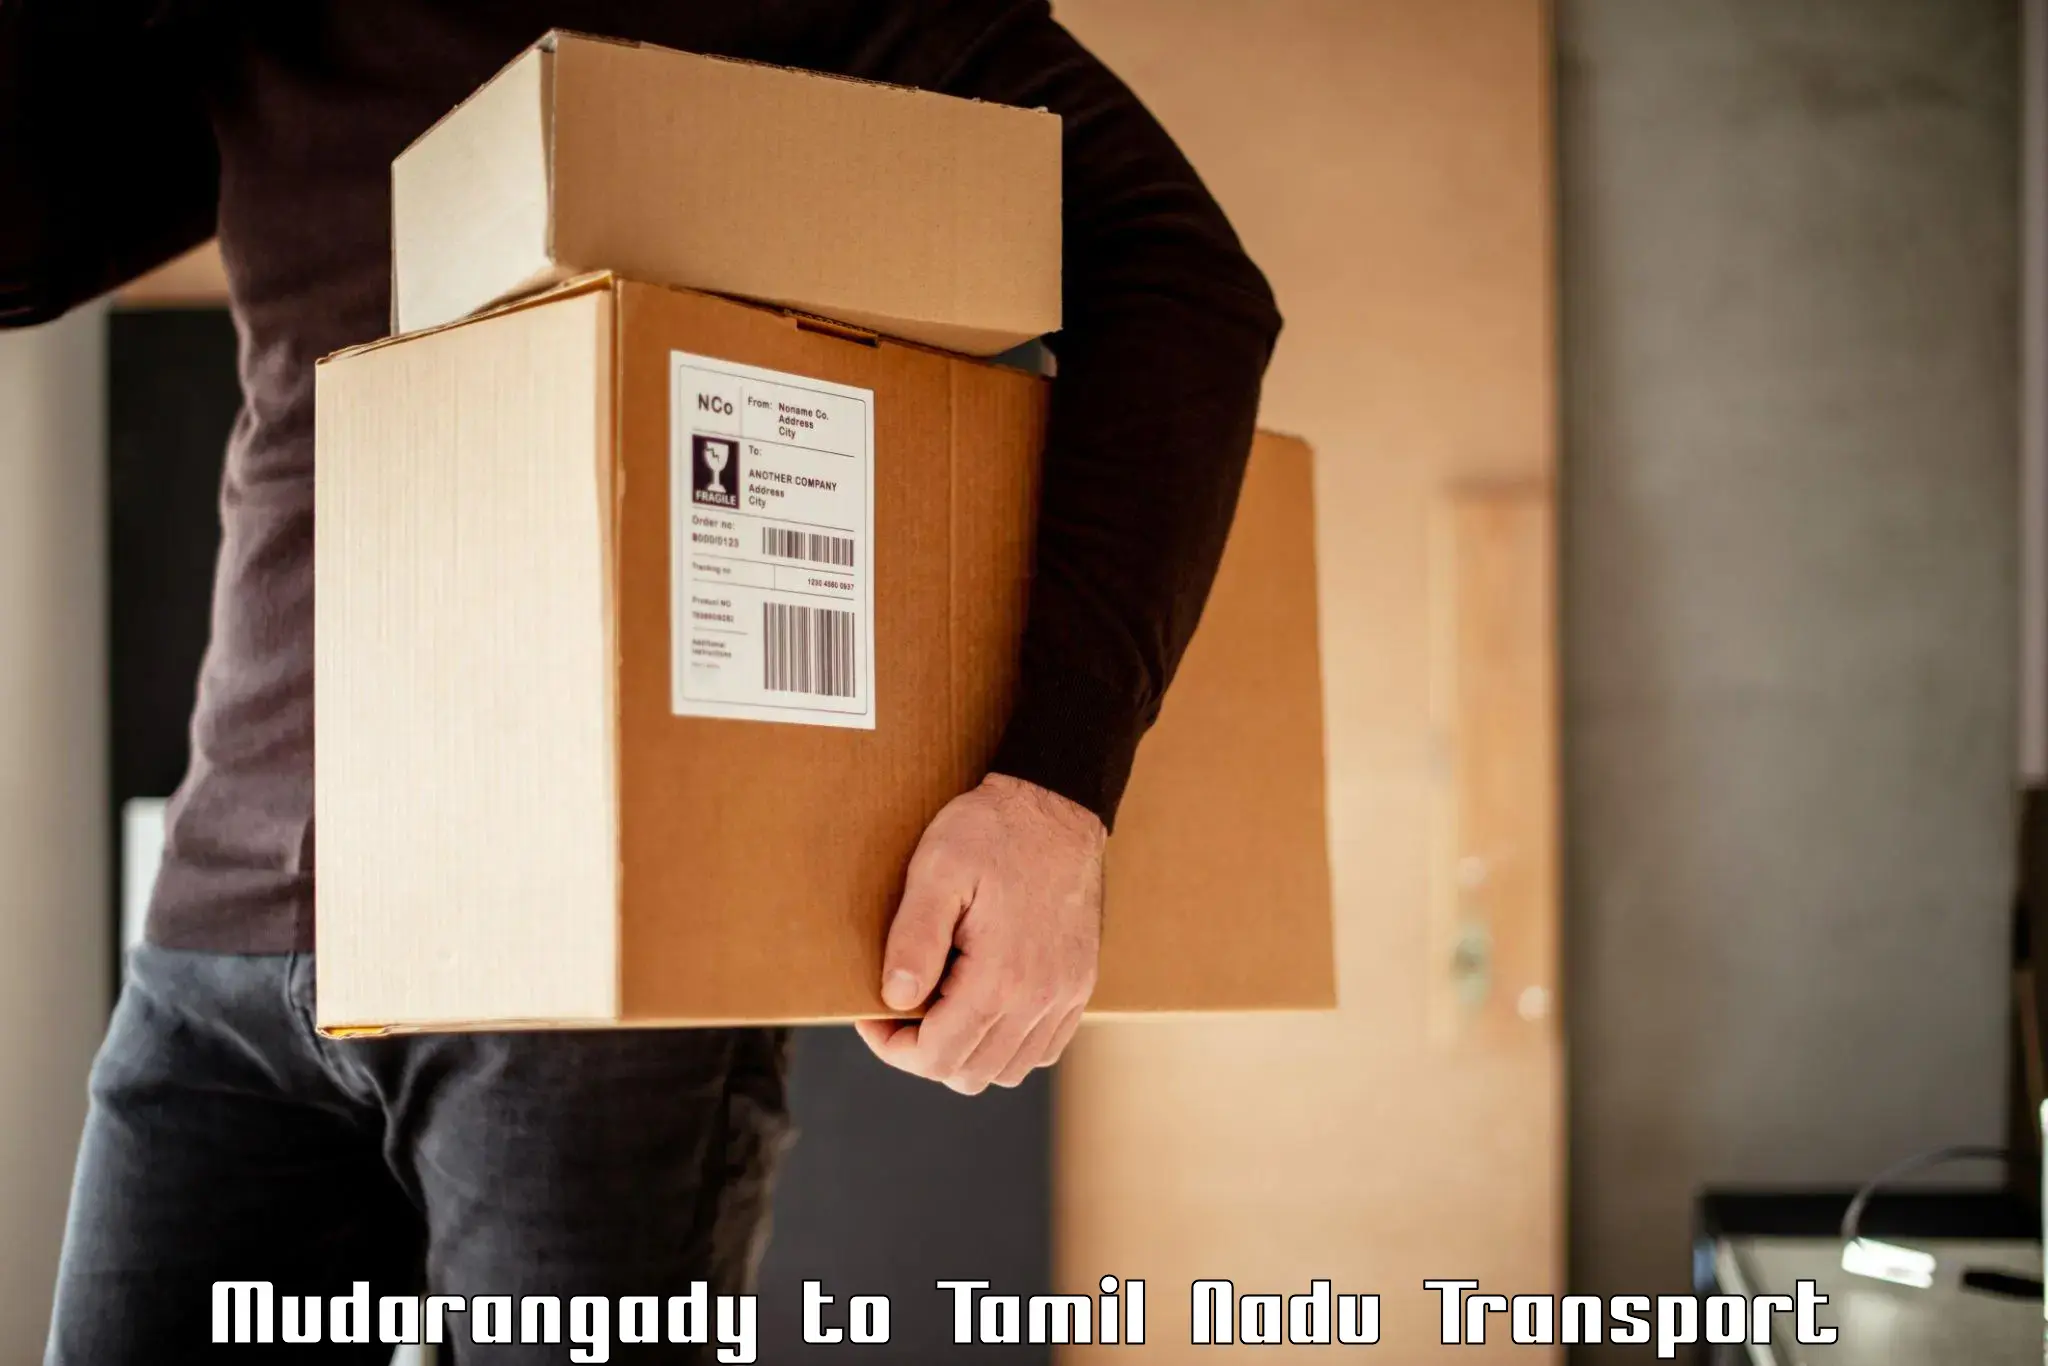 Cargo transportation services Mudarangady to Nagercoil